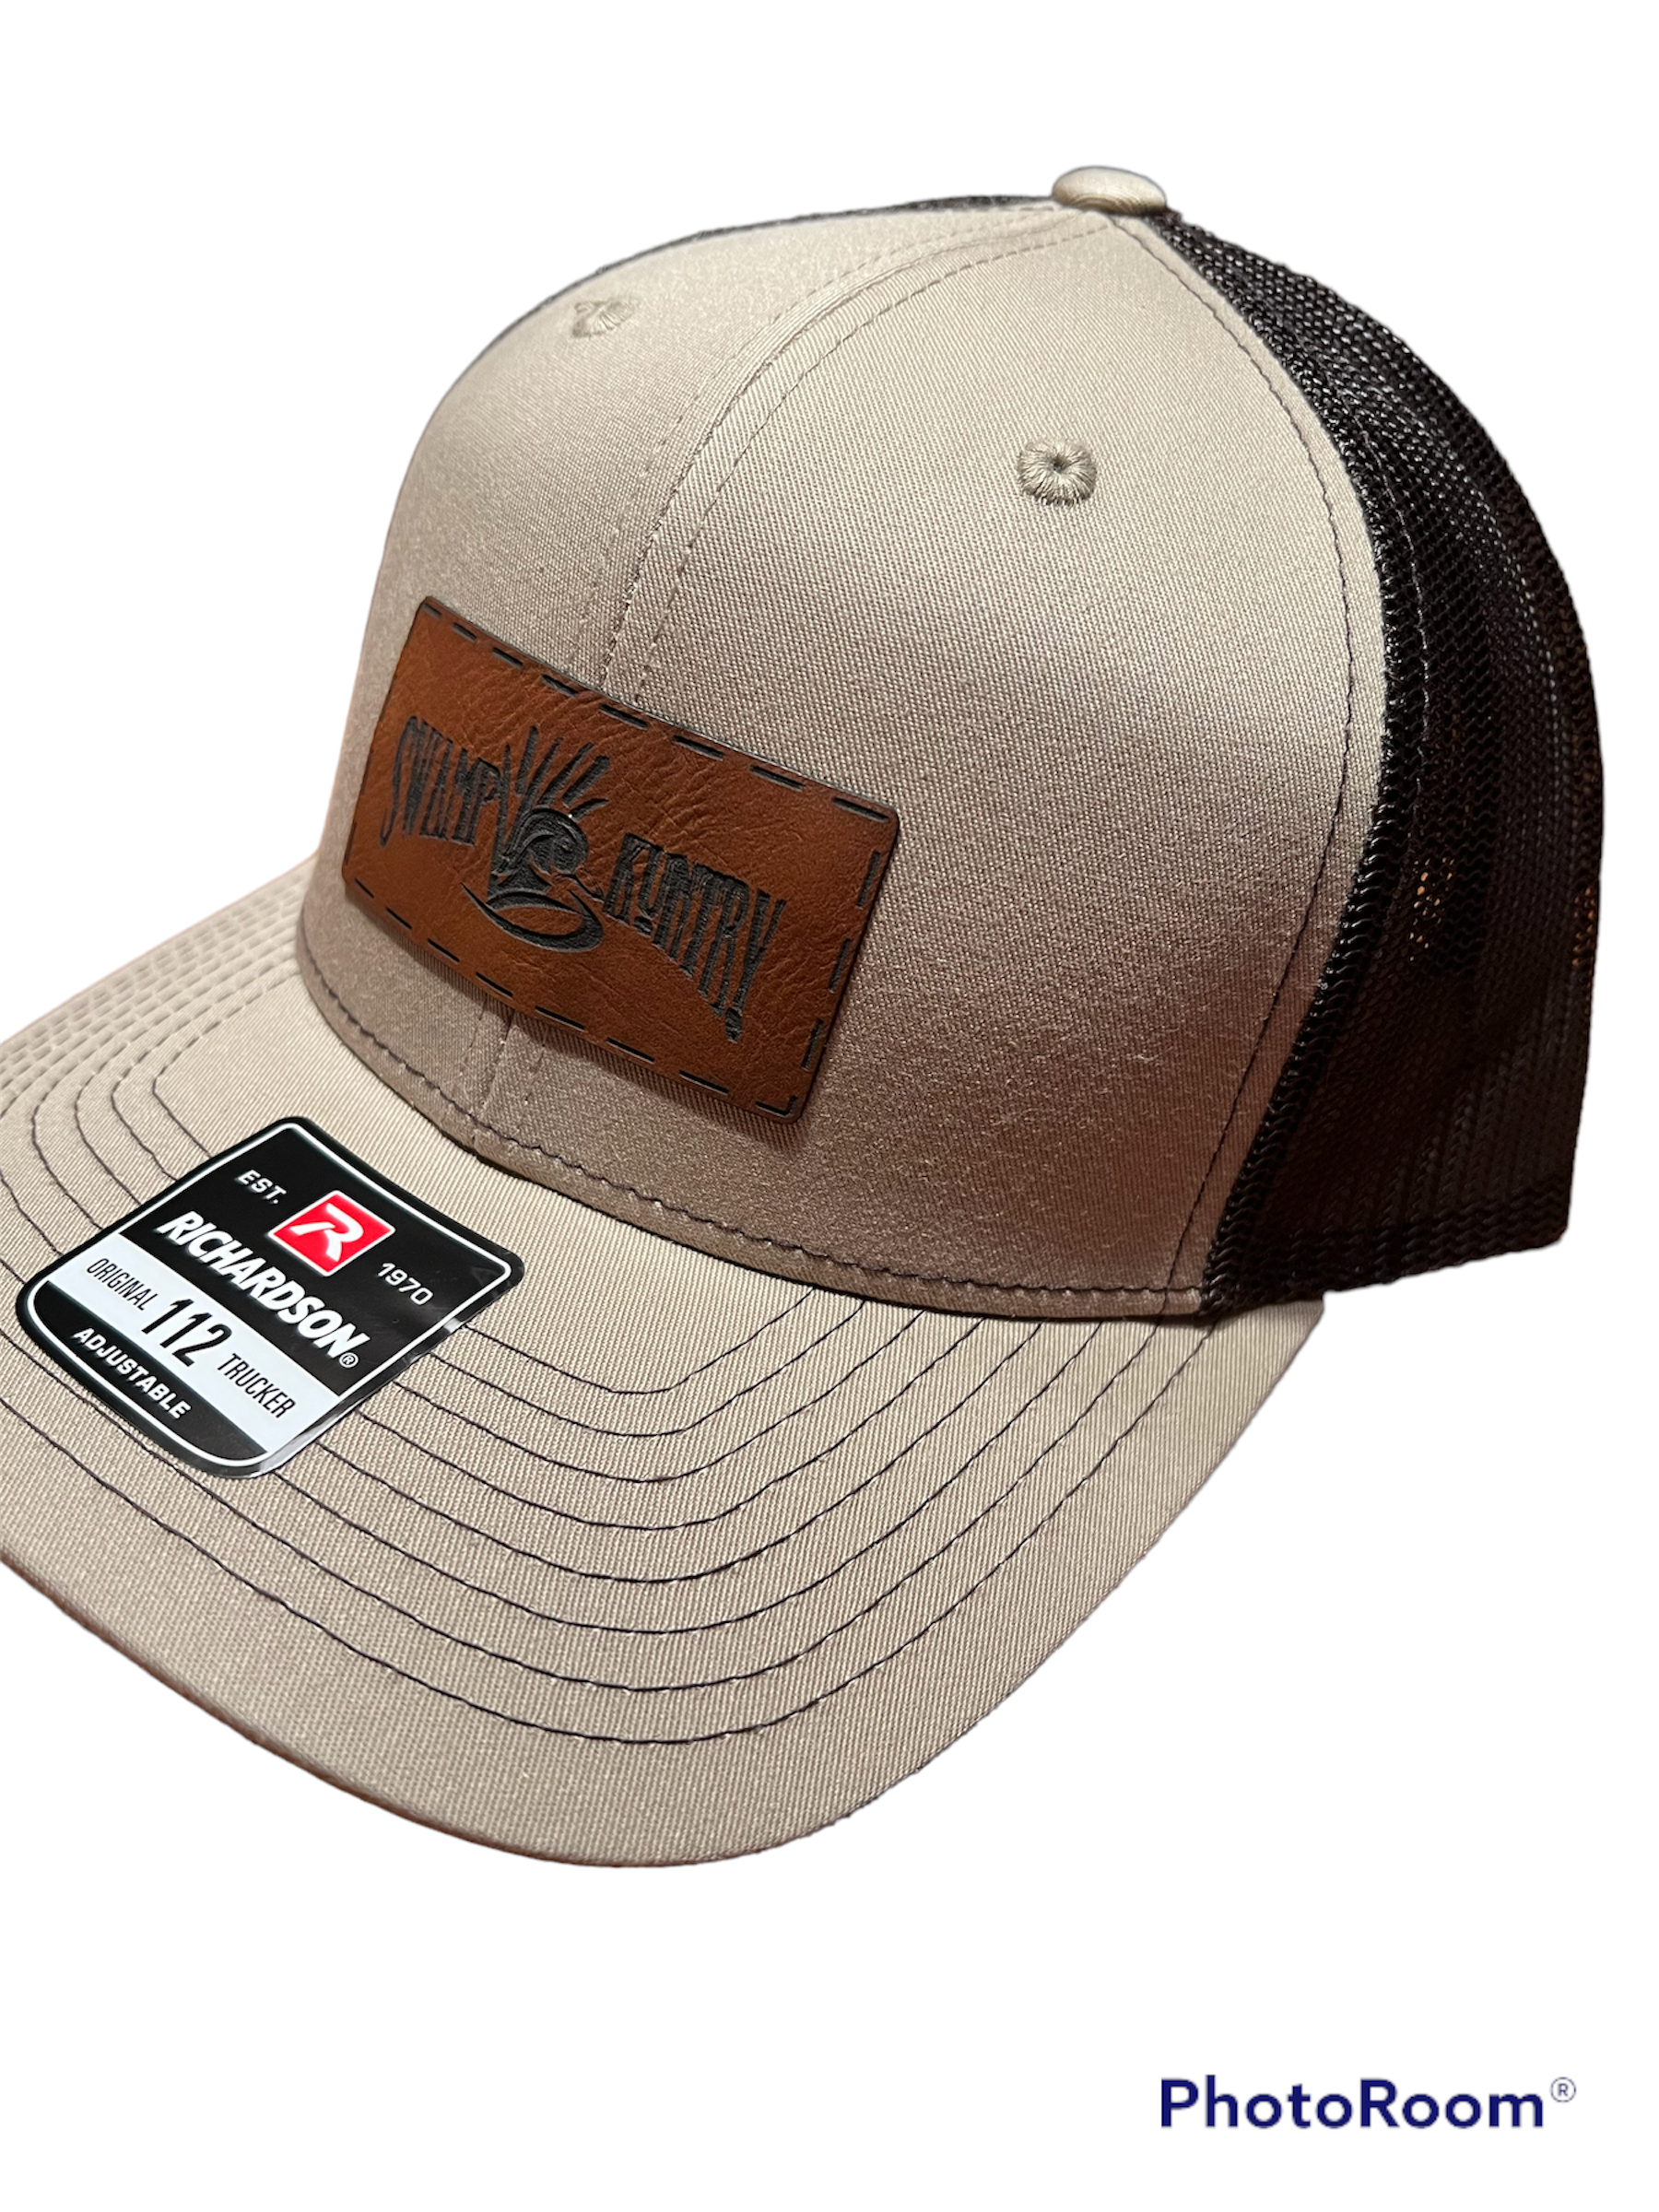 Richardson 112 Trucker Hat with Embroidered Front Patch